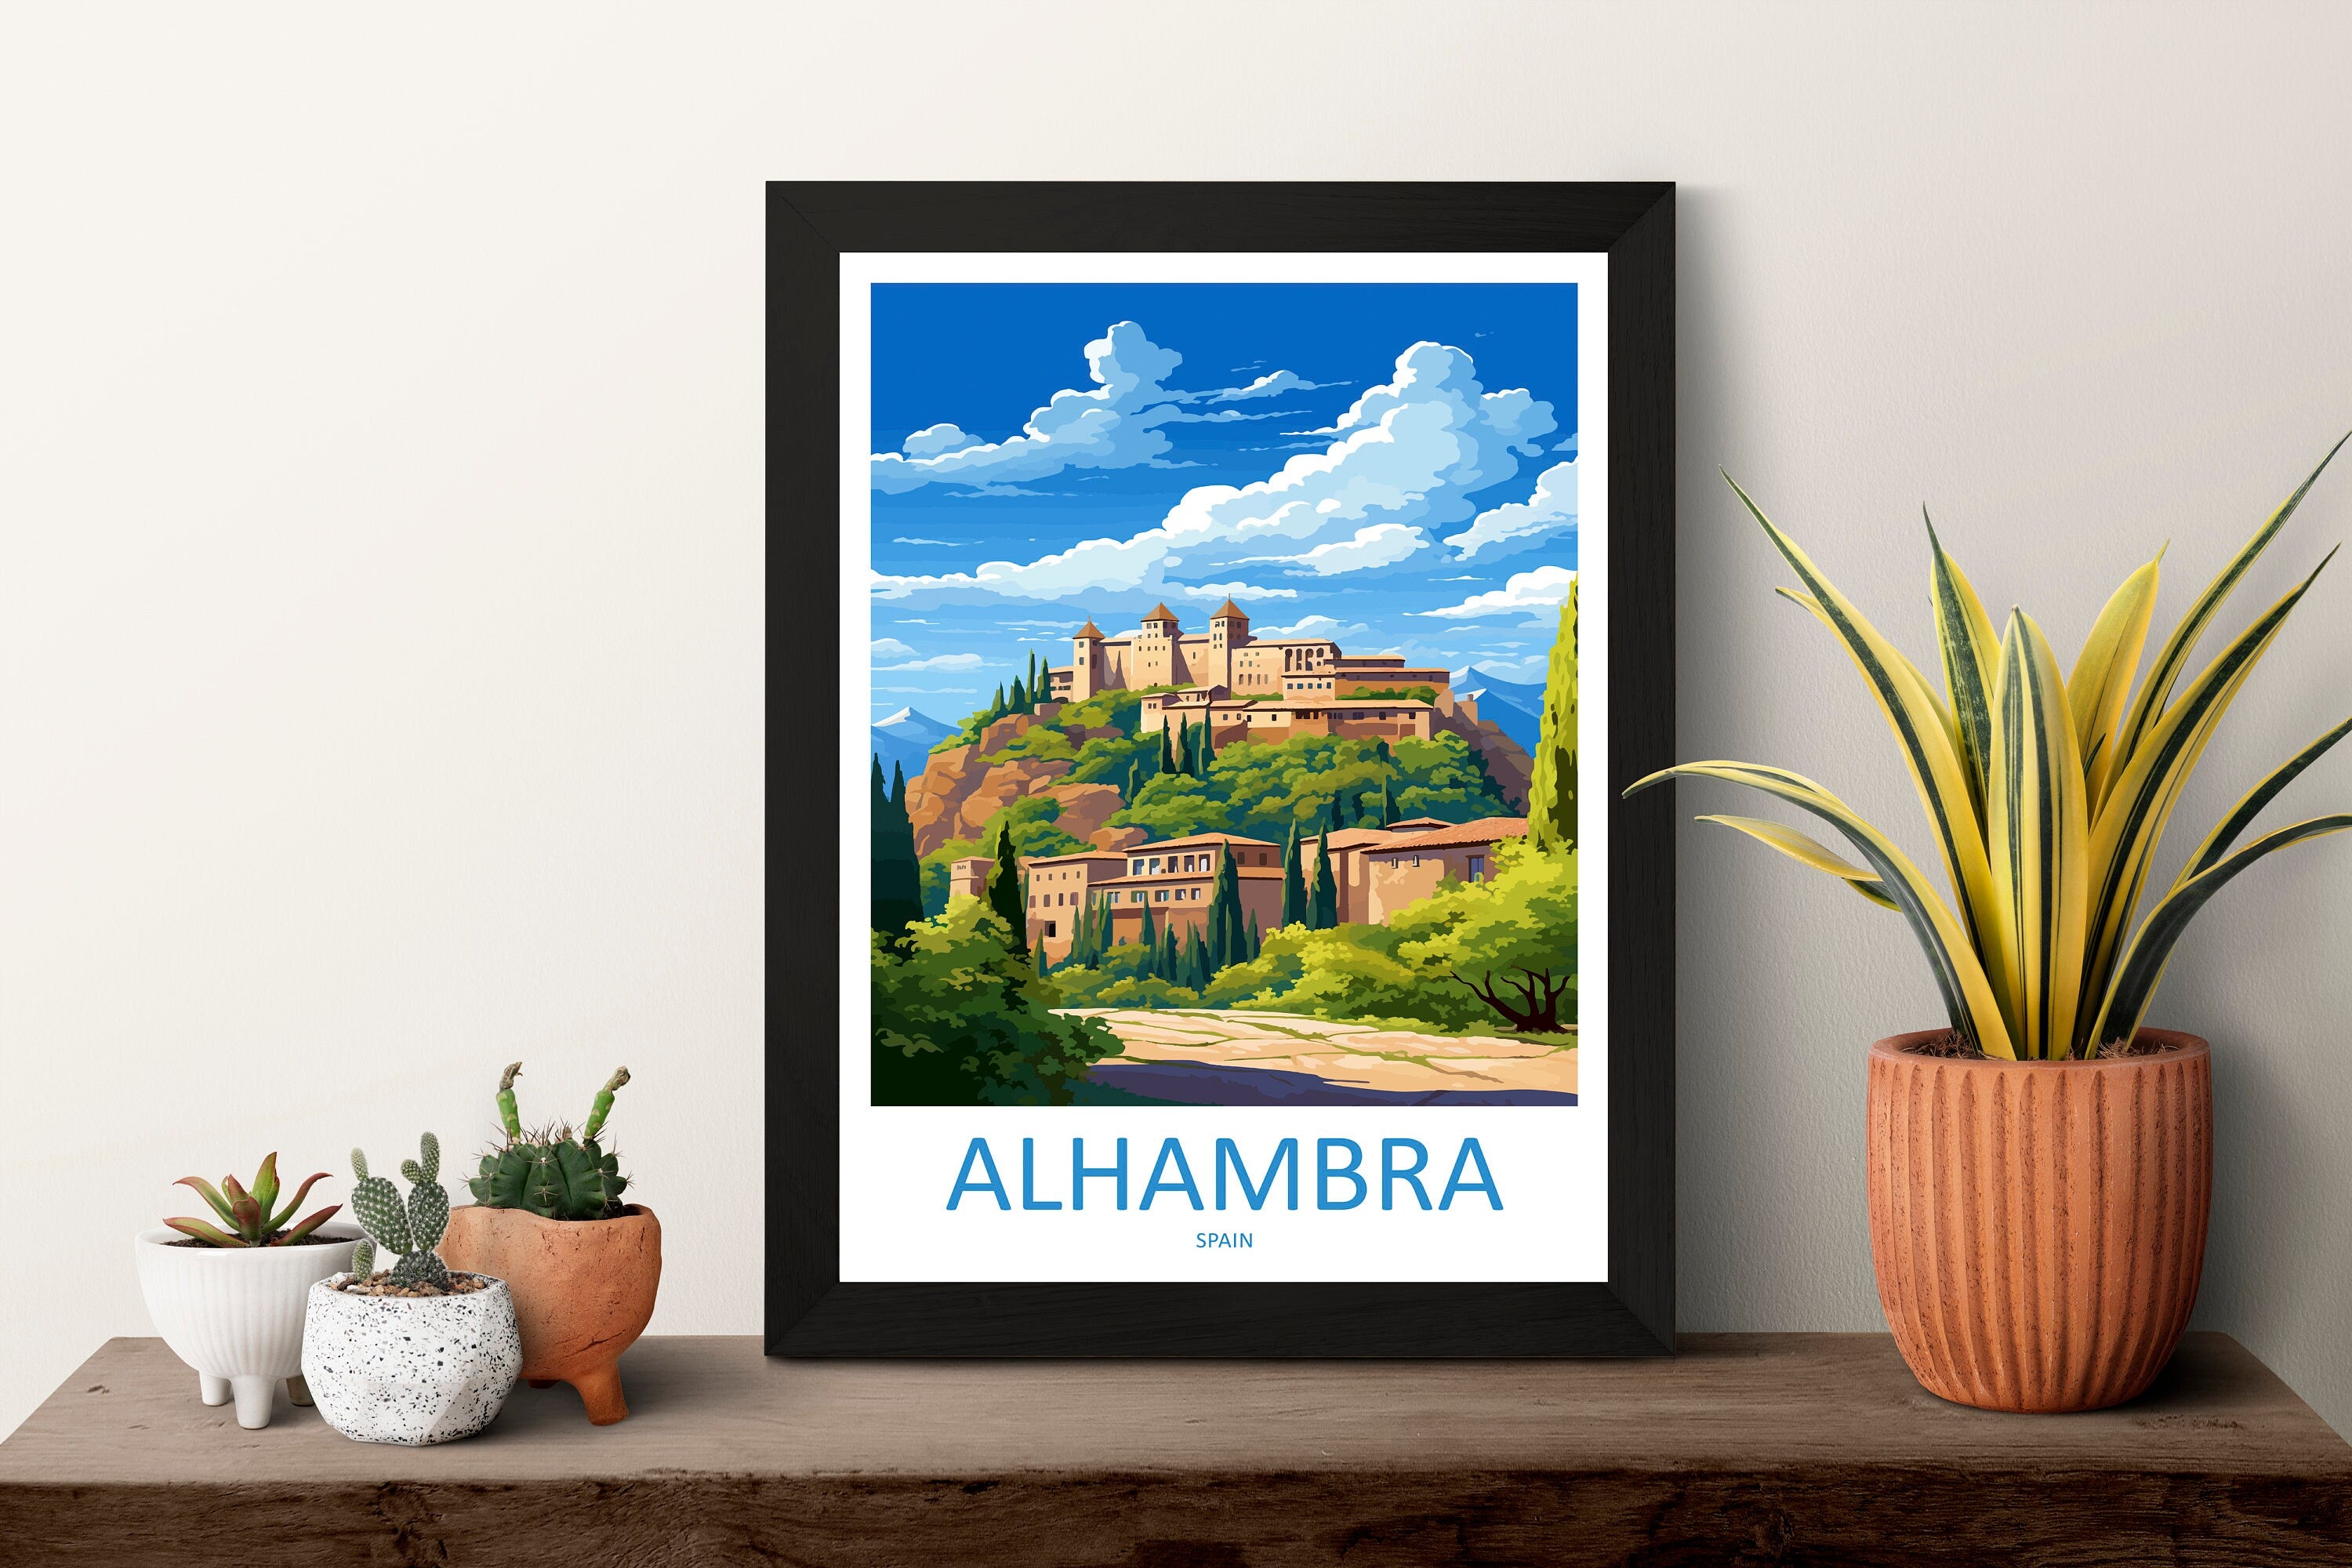 Alhambra Travel Print Wall Art Alhambra Wall Hanging Home Décor Alhambra Gift Art Lovers Spain Art Gift Alhambra Travel Poster art